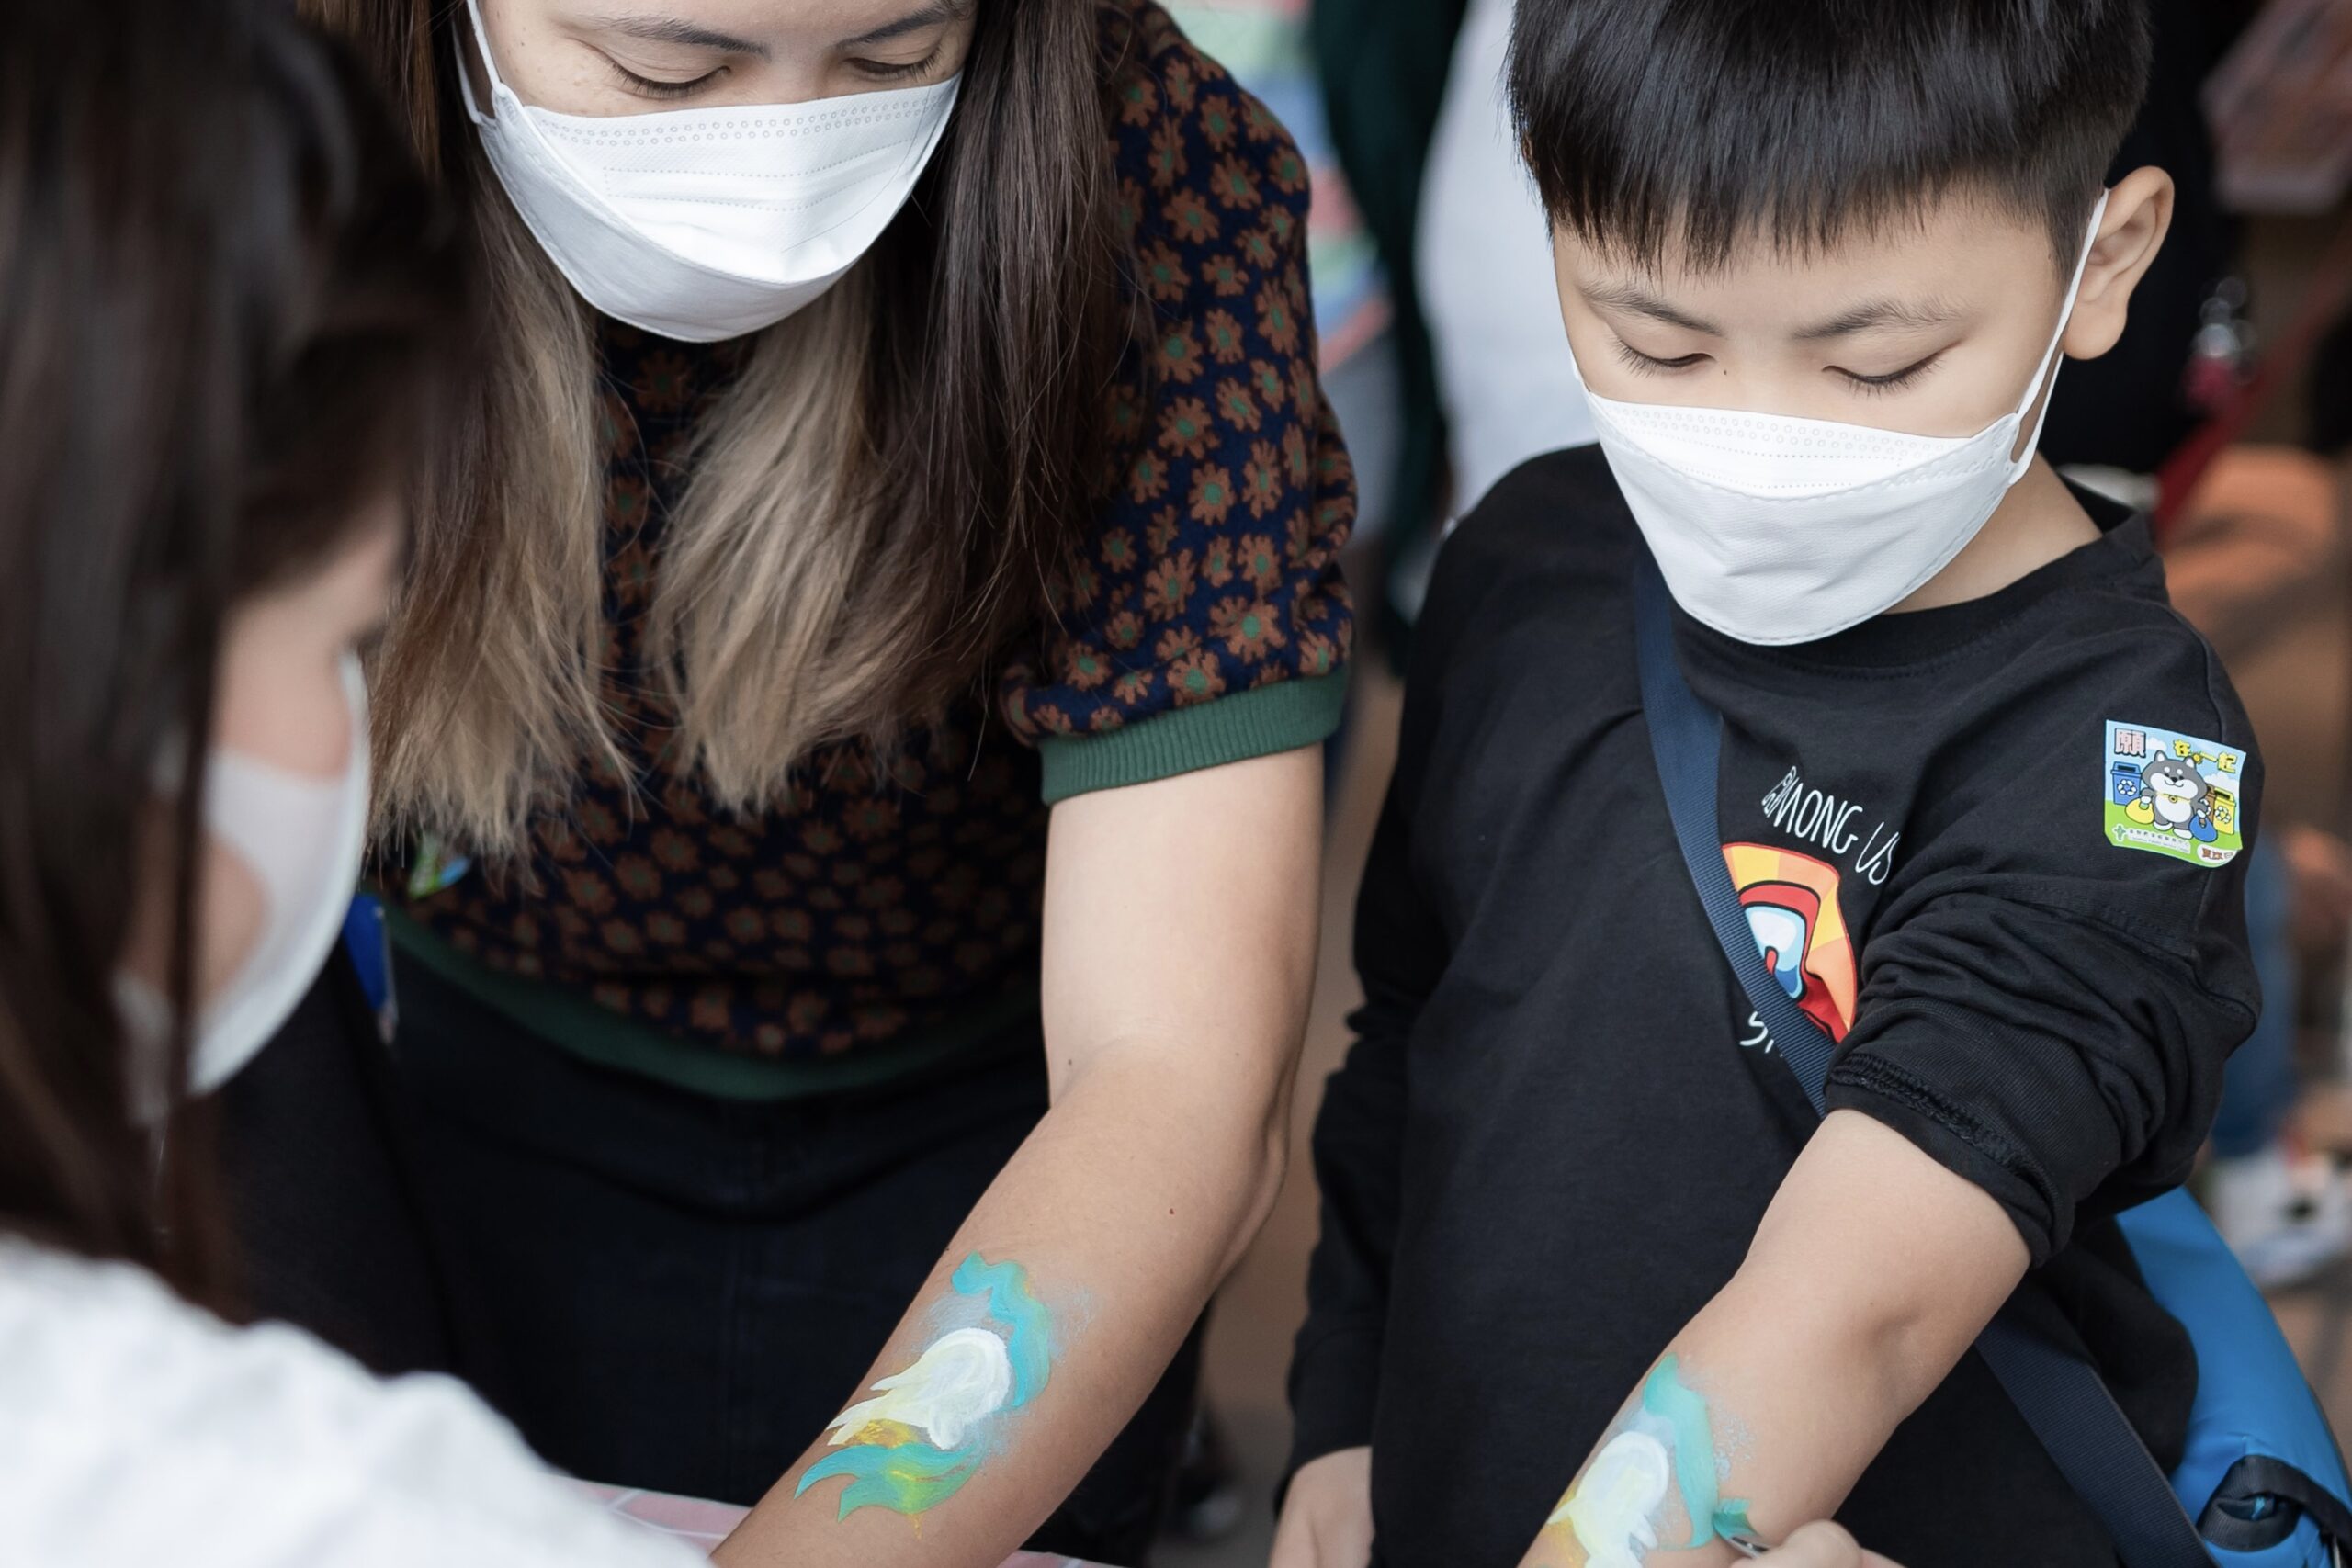 Visit the hand-painting booth to get an ocean-themed work of art on your arm.